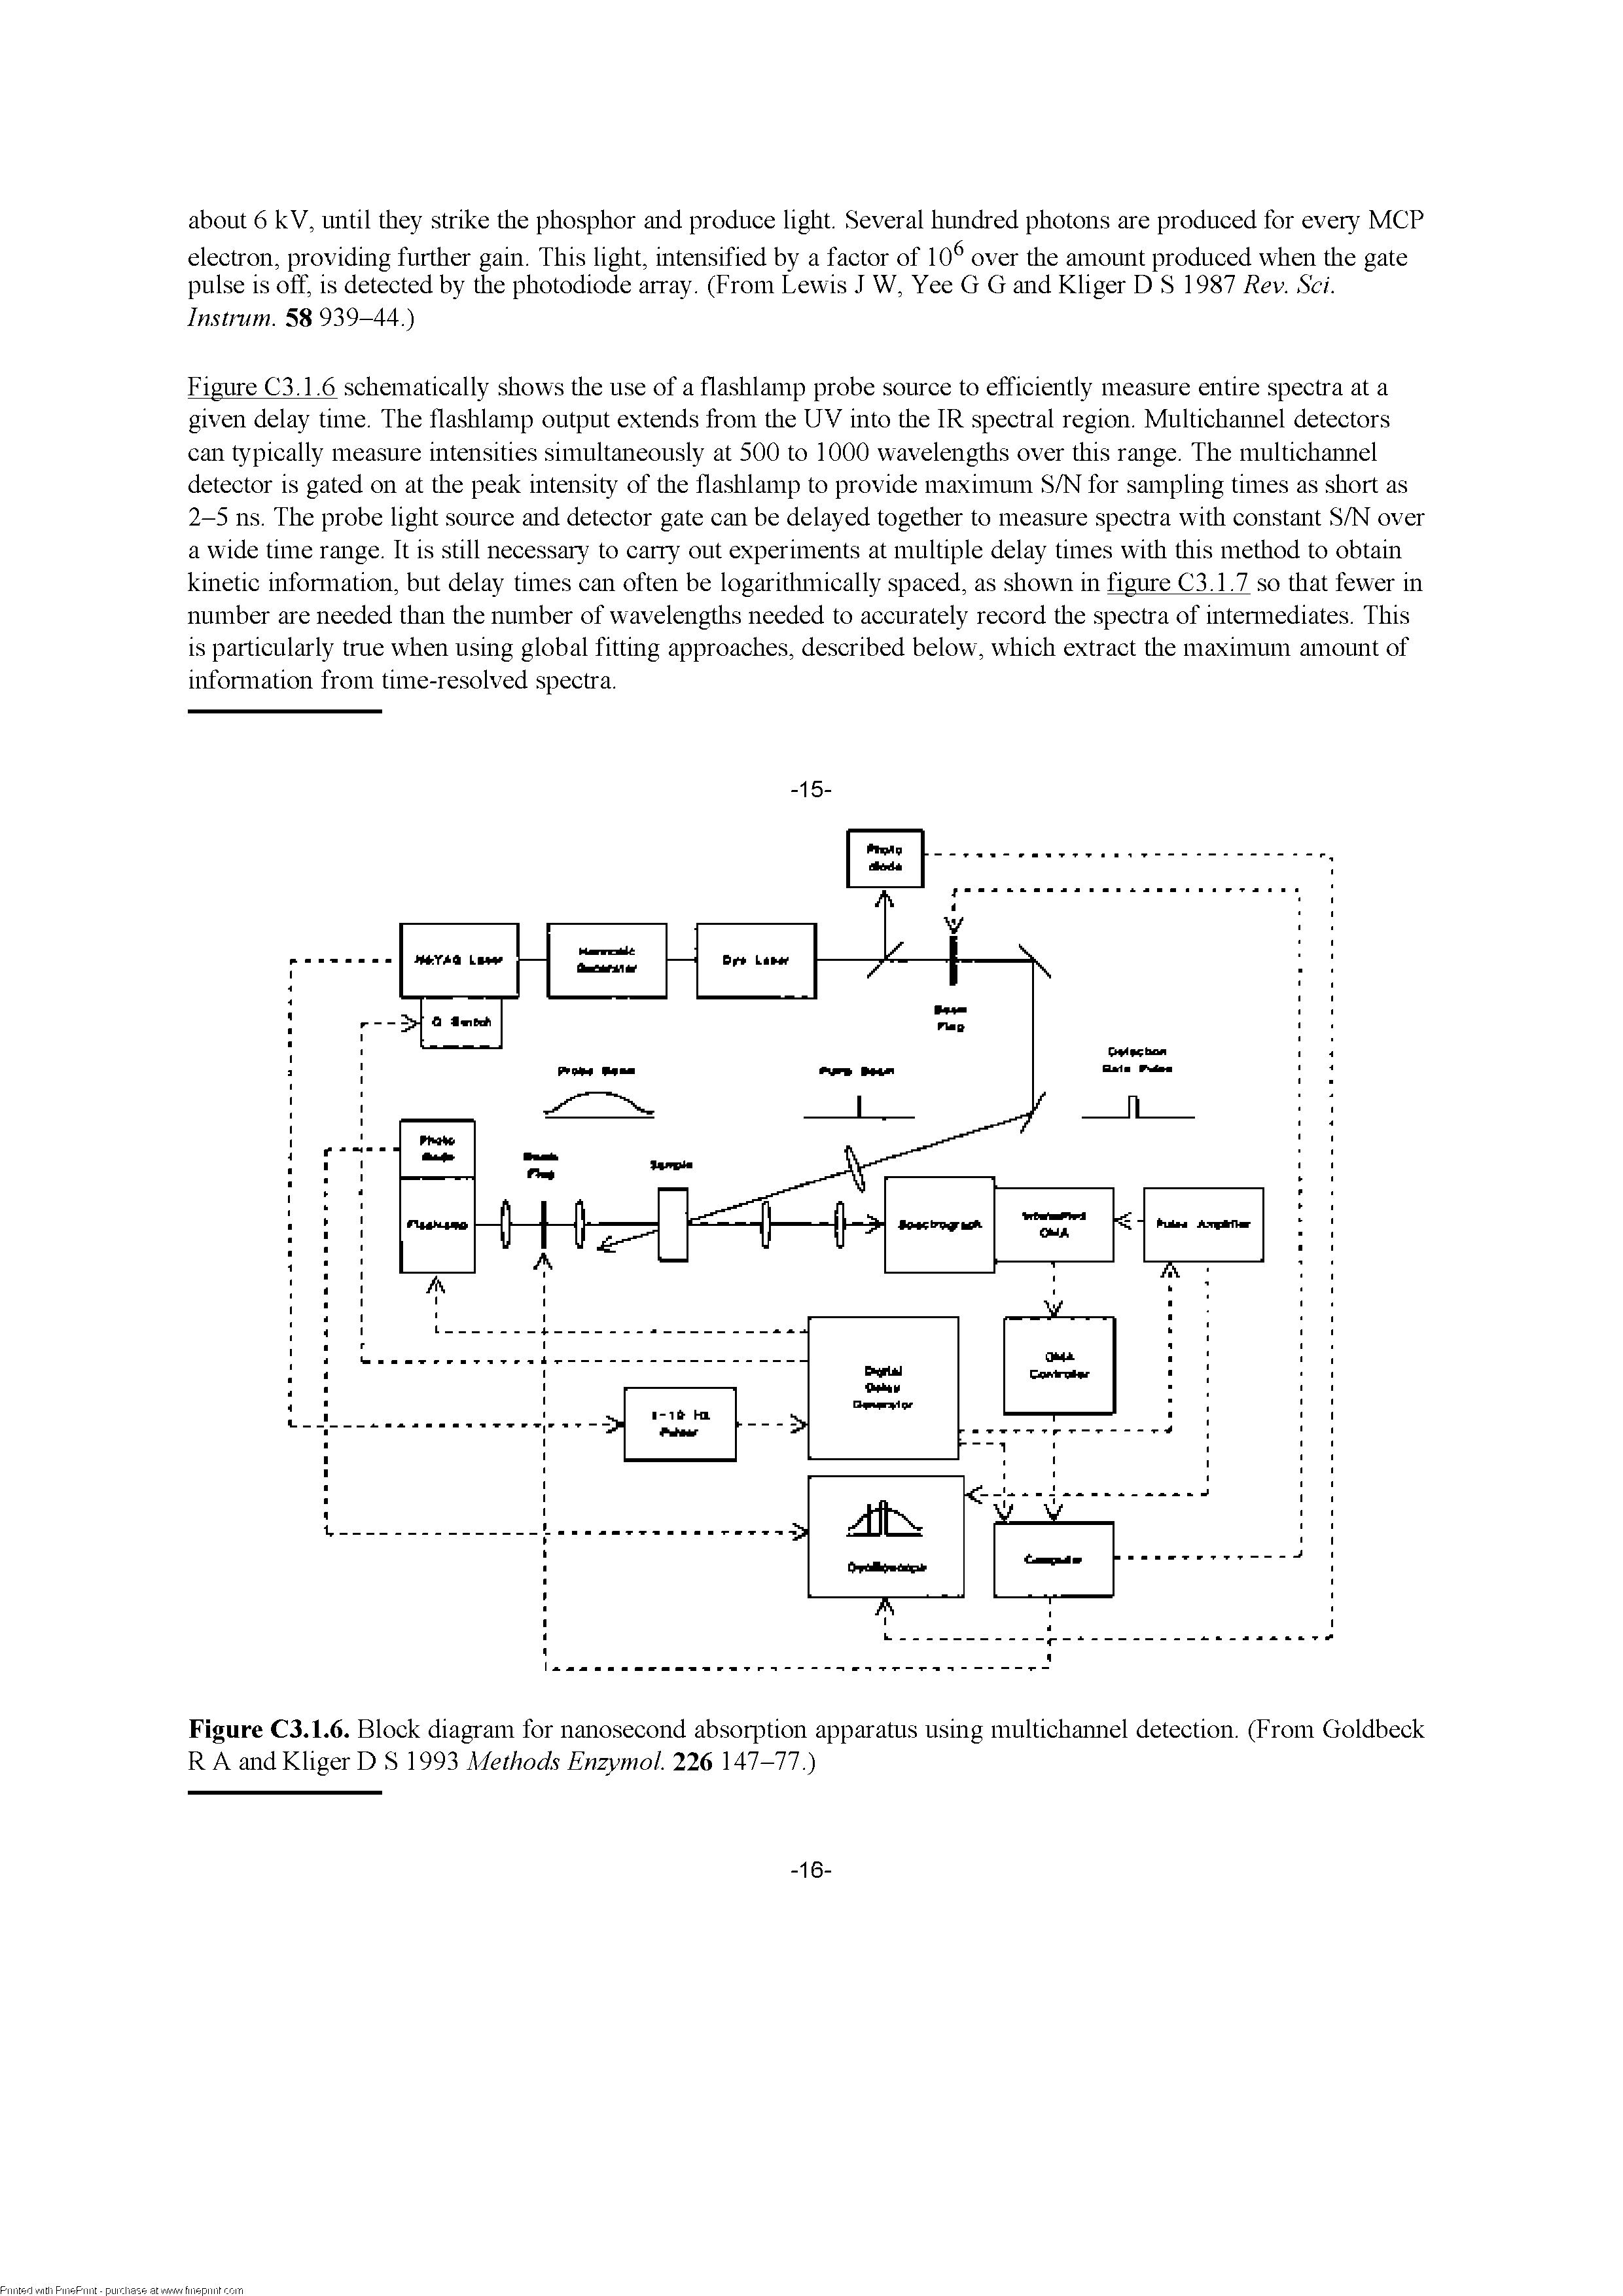 Figure C3.1.6. Block diagram for nanosecond absorjDtion apparatus using multichannel detection. (From Goldbeck R A and Kliger D S 1993 Adethods Enzymol. 226 147-77.)...